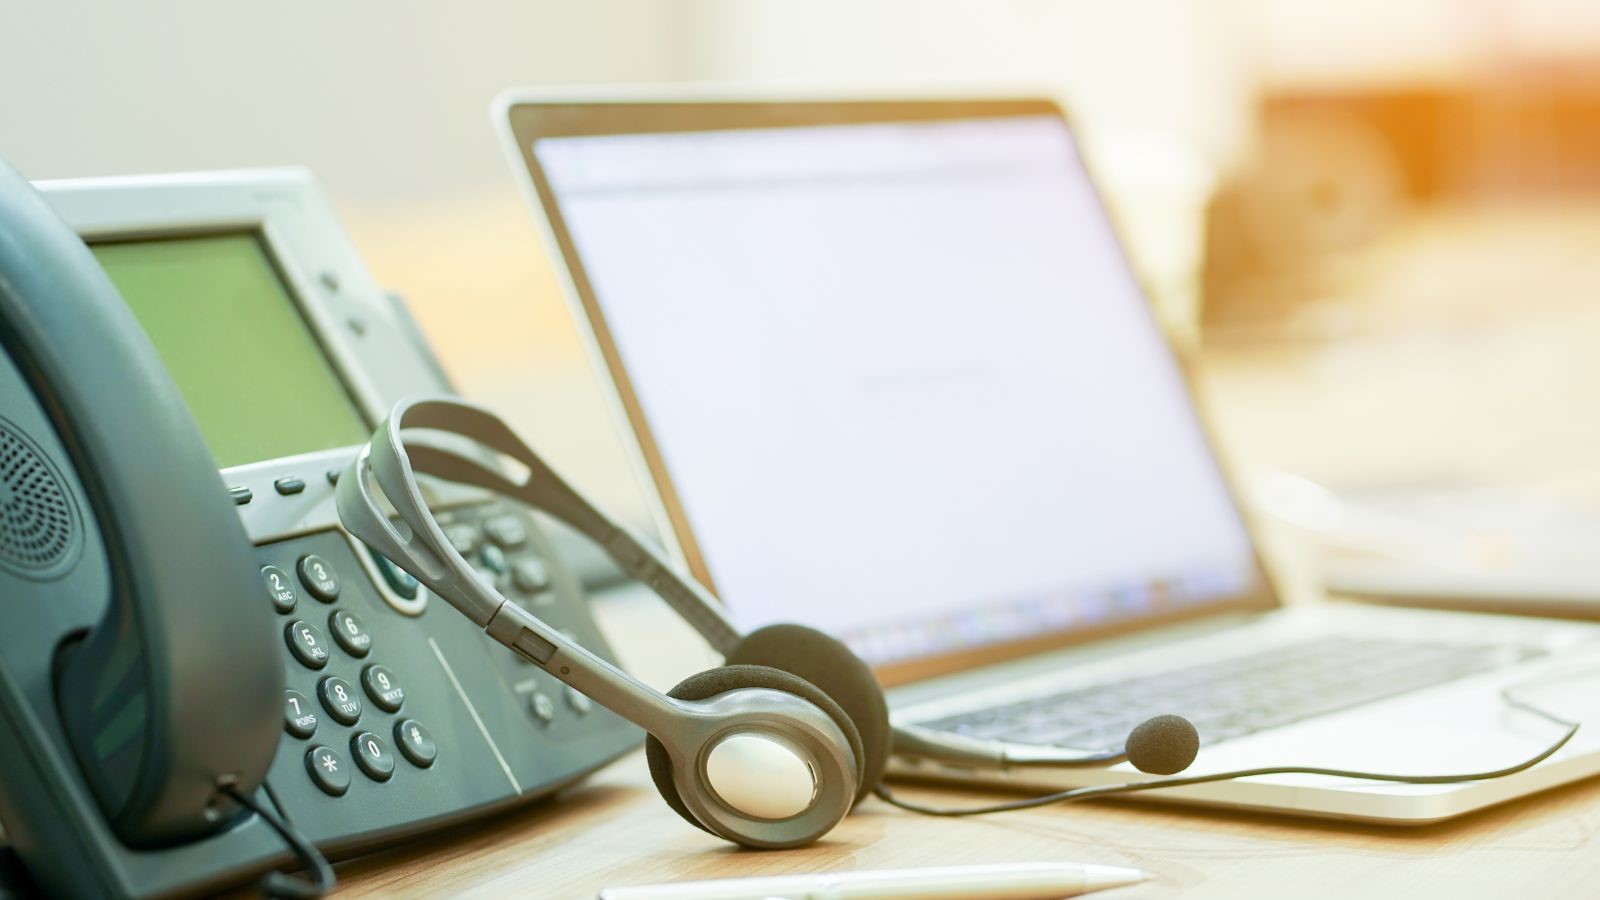 VoIP Office Phone systems